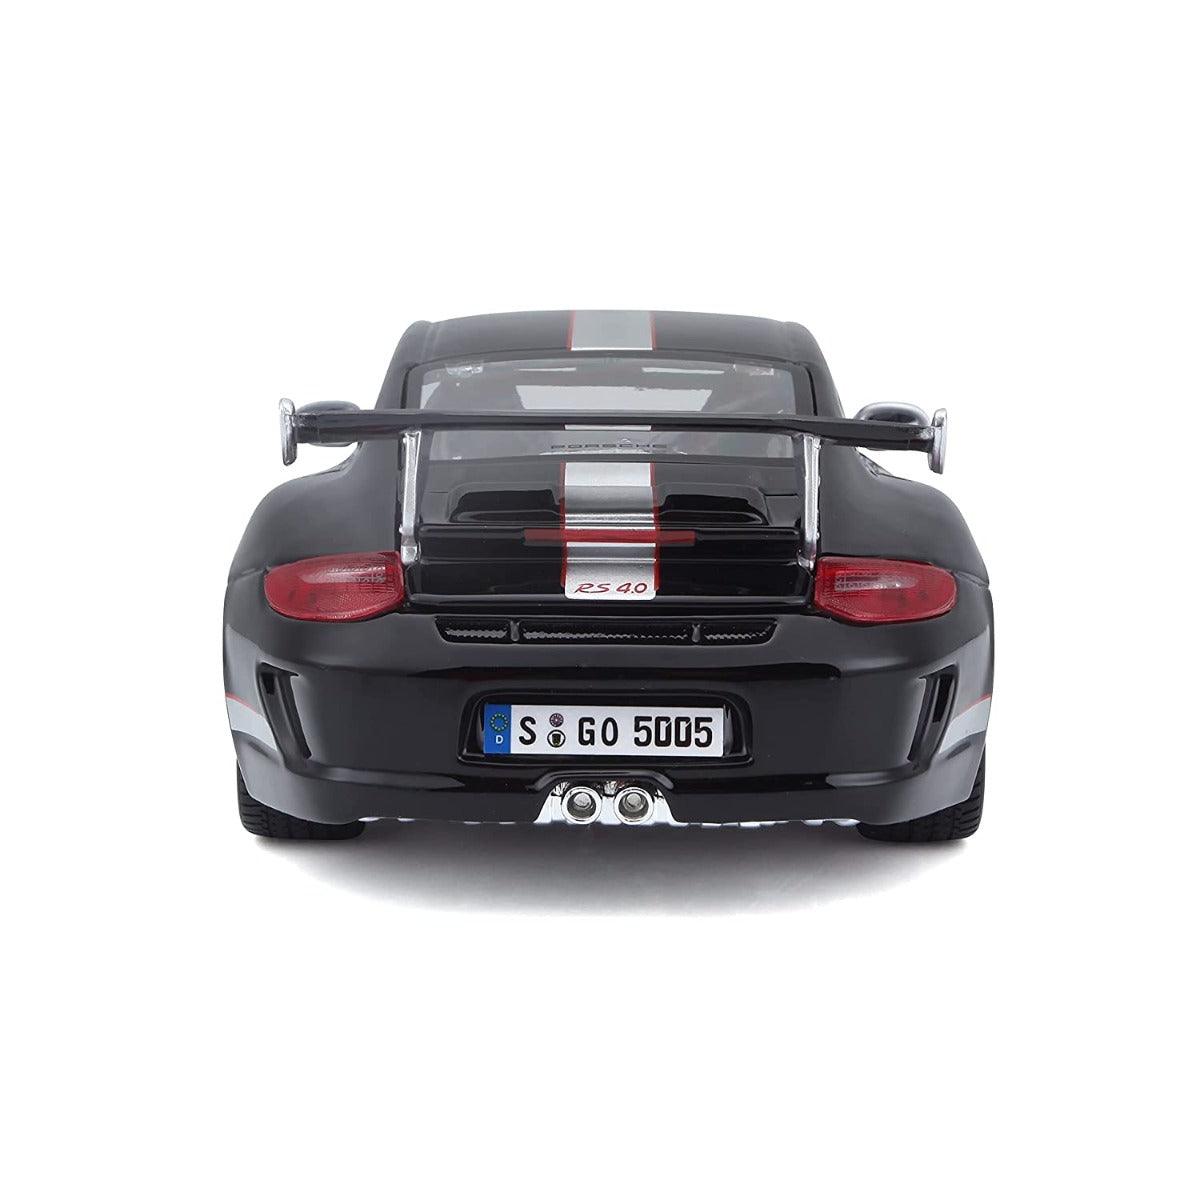 Bburago Die-Cast 1:18 Scale Porsche 911 GT3 car - Die-Cast 1:18 Scale Porsche  911 GT3 car . Buy Car toys in India. shop for Bburago products in India.  Toys for 3 - 11 Years Kids.